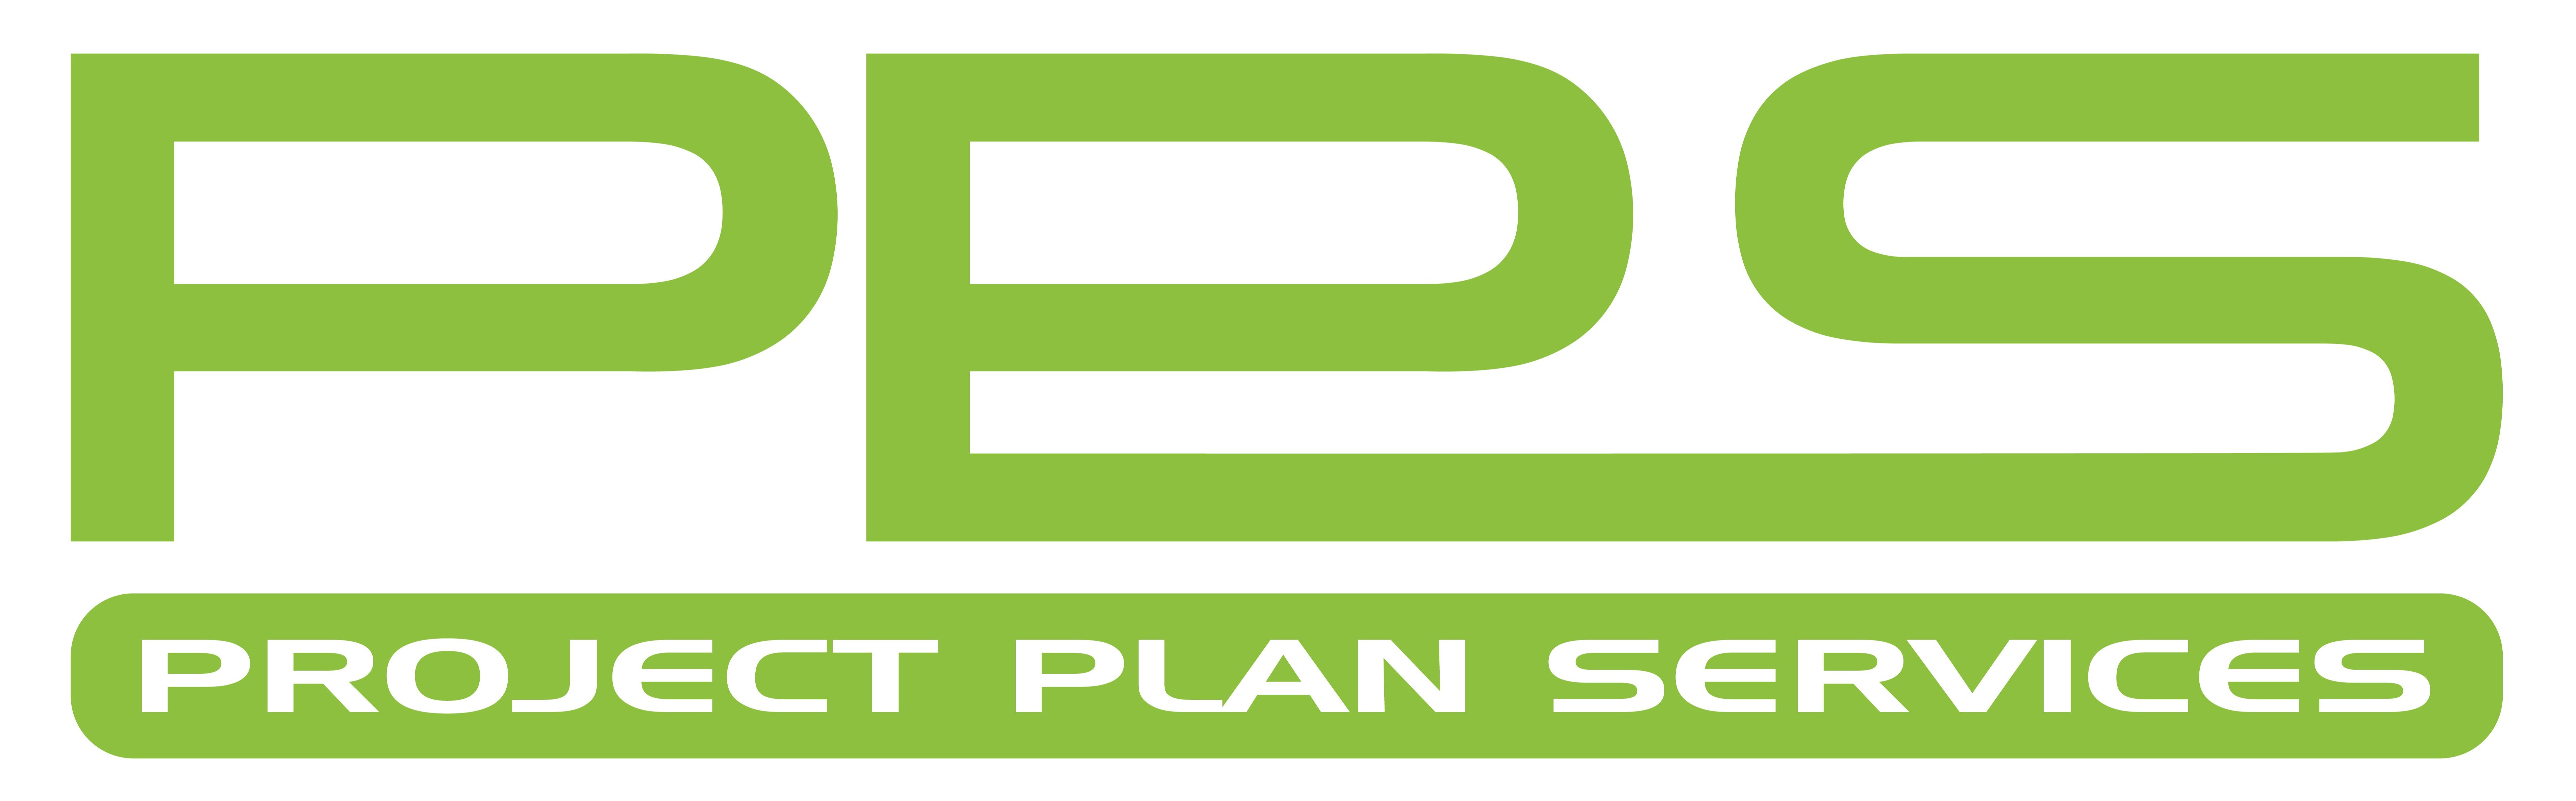 Project Plan Services